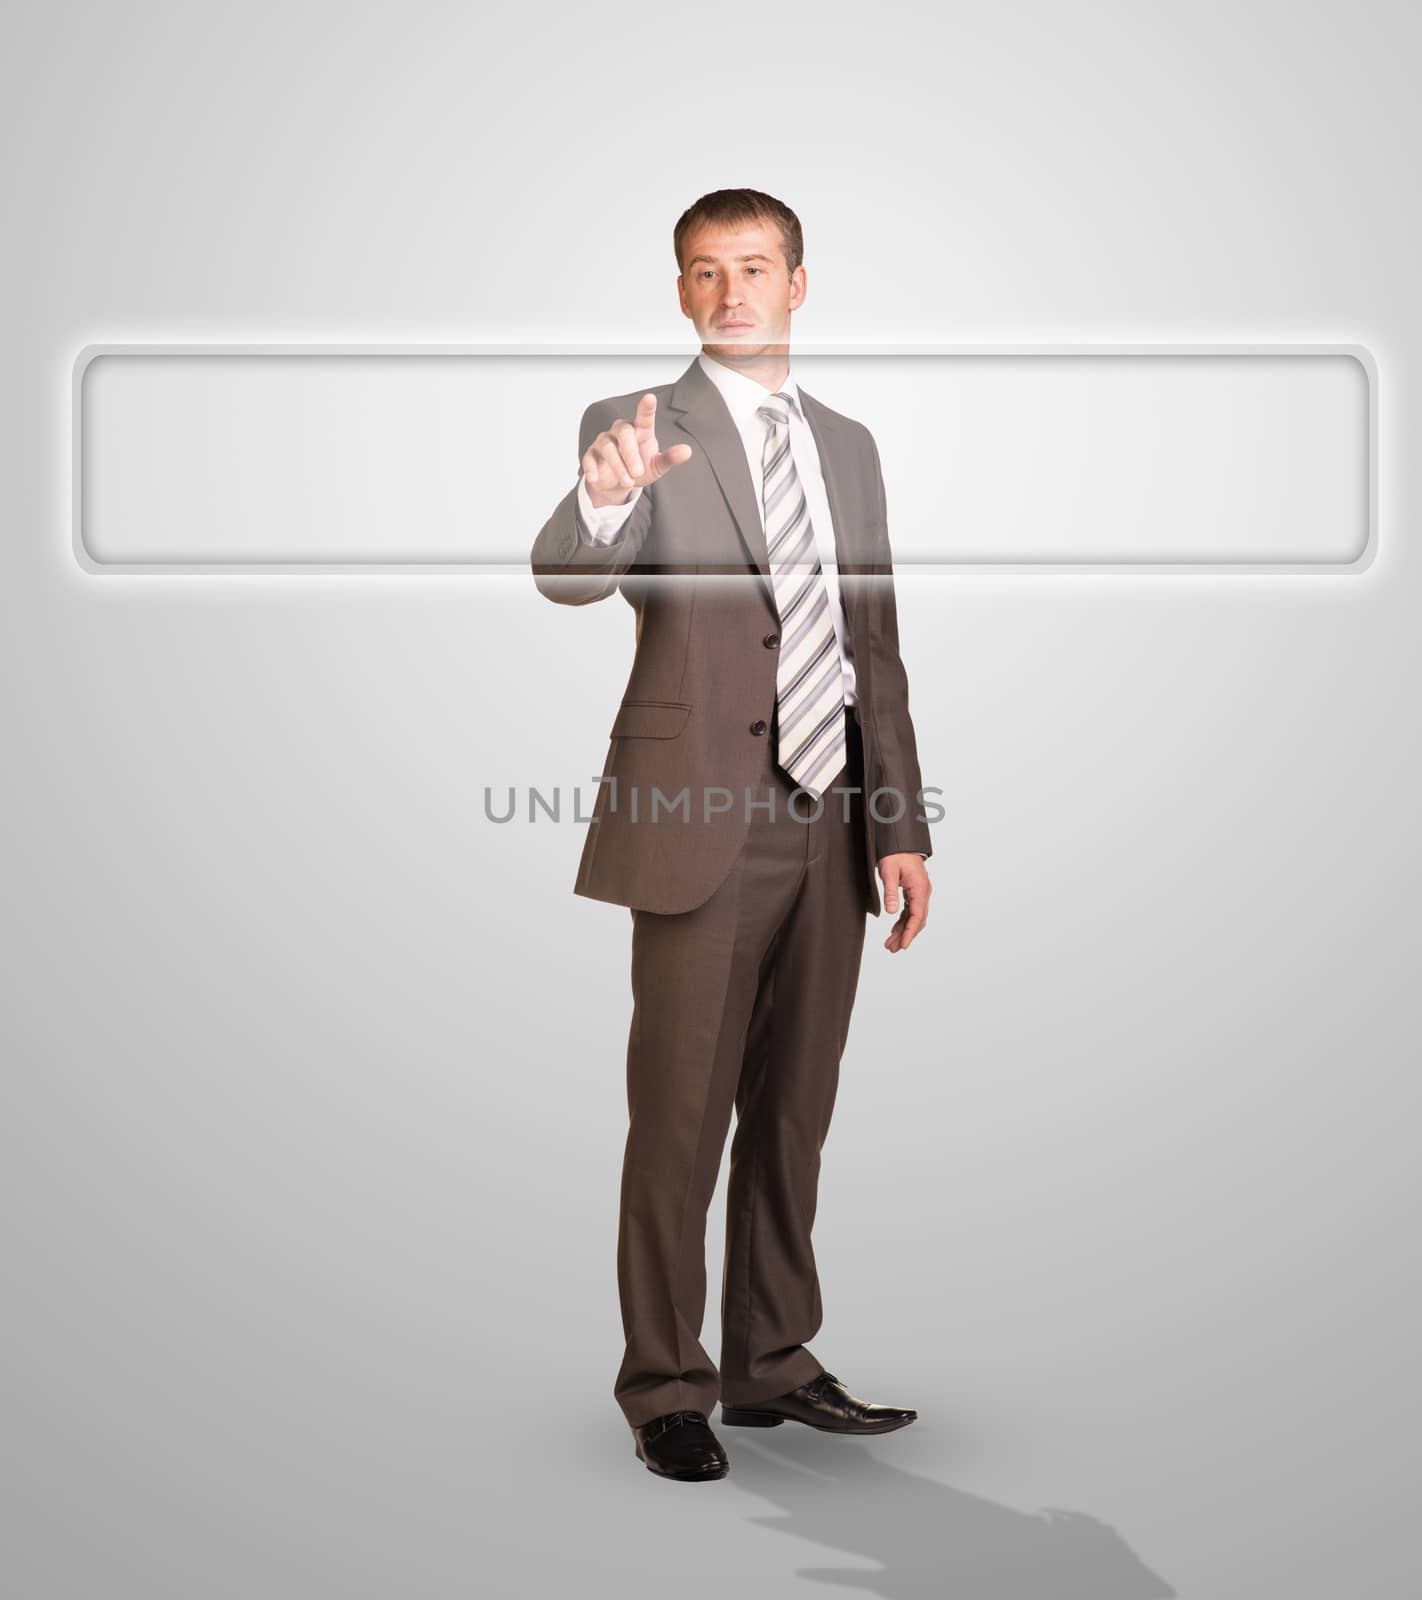 Businessman standing and pressing on holographic screen on abstract grey background, close-up view